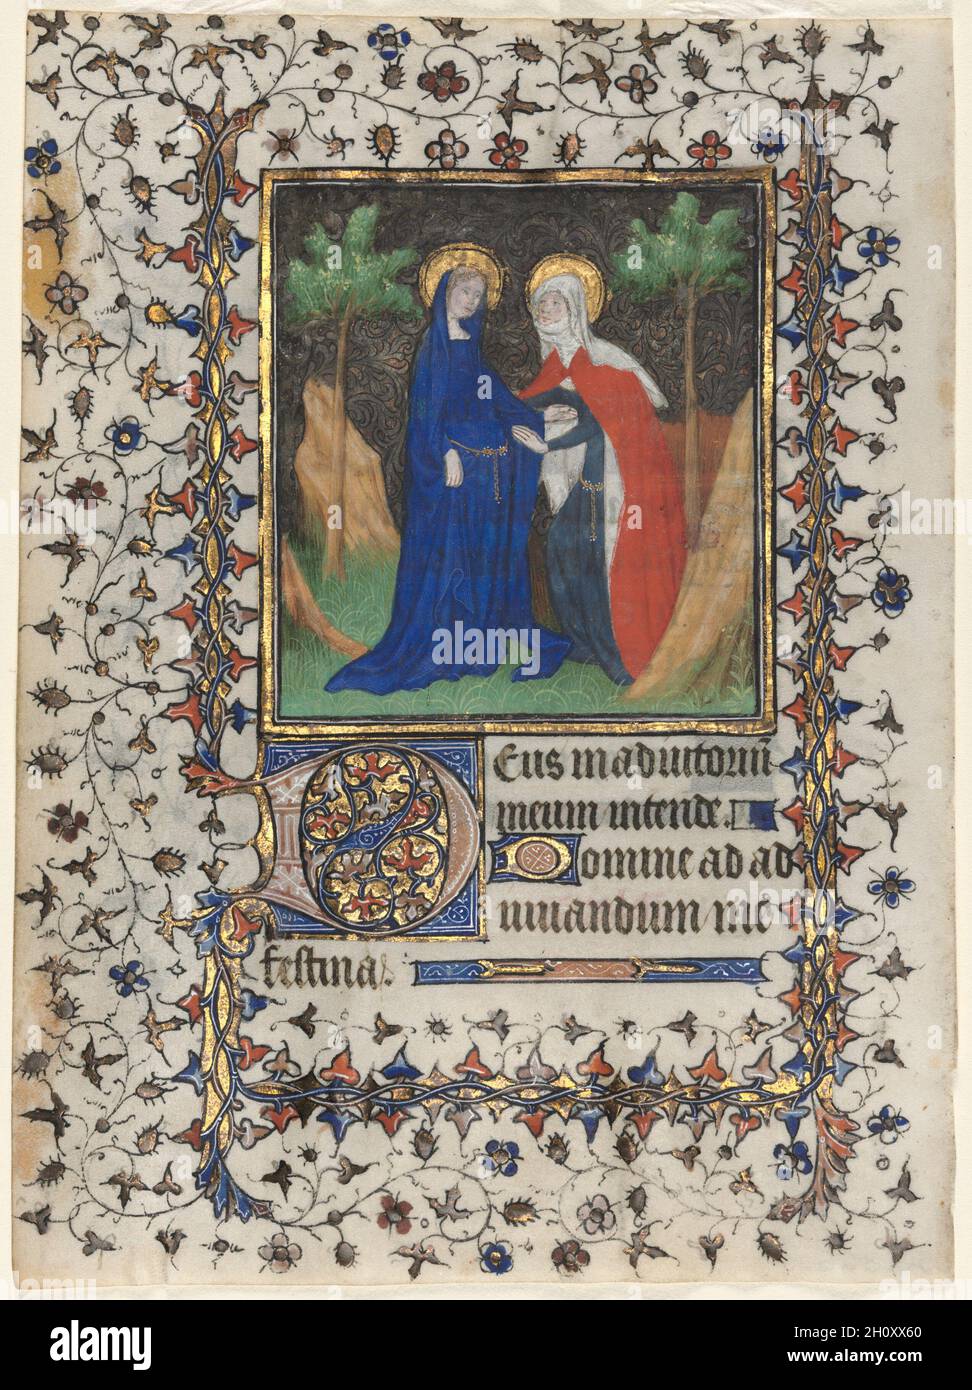 Leaf from a Book of Hours: The Visitation, c. 1415. Workshop of Boucicaut Master (French, Paris, active about 1410-25). Ink, tempera, and gold on vellum; sheet: 17 x 12.7 cm (6 11/16 x 5 in.). Stock Photo